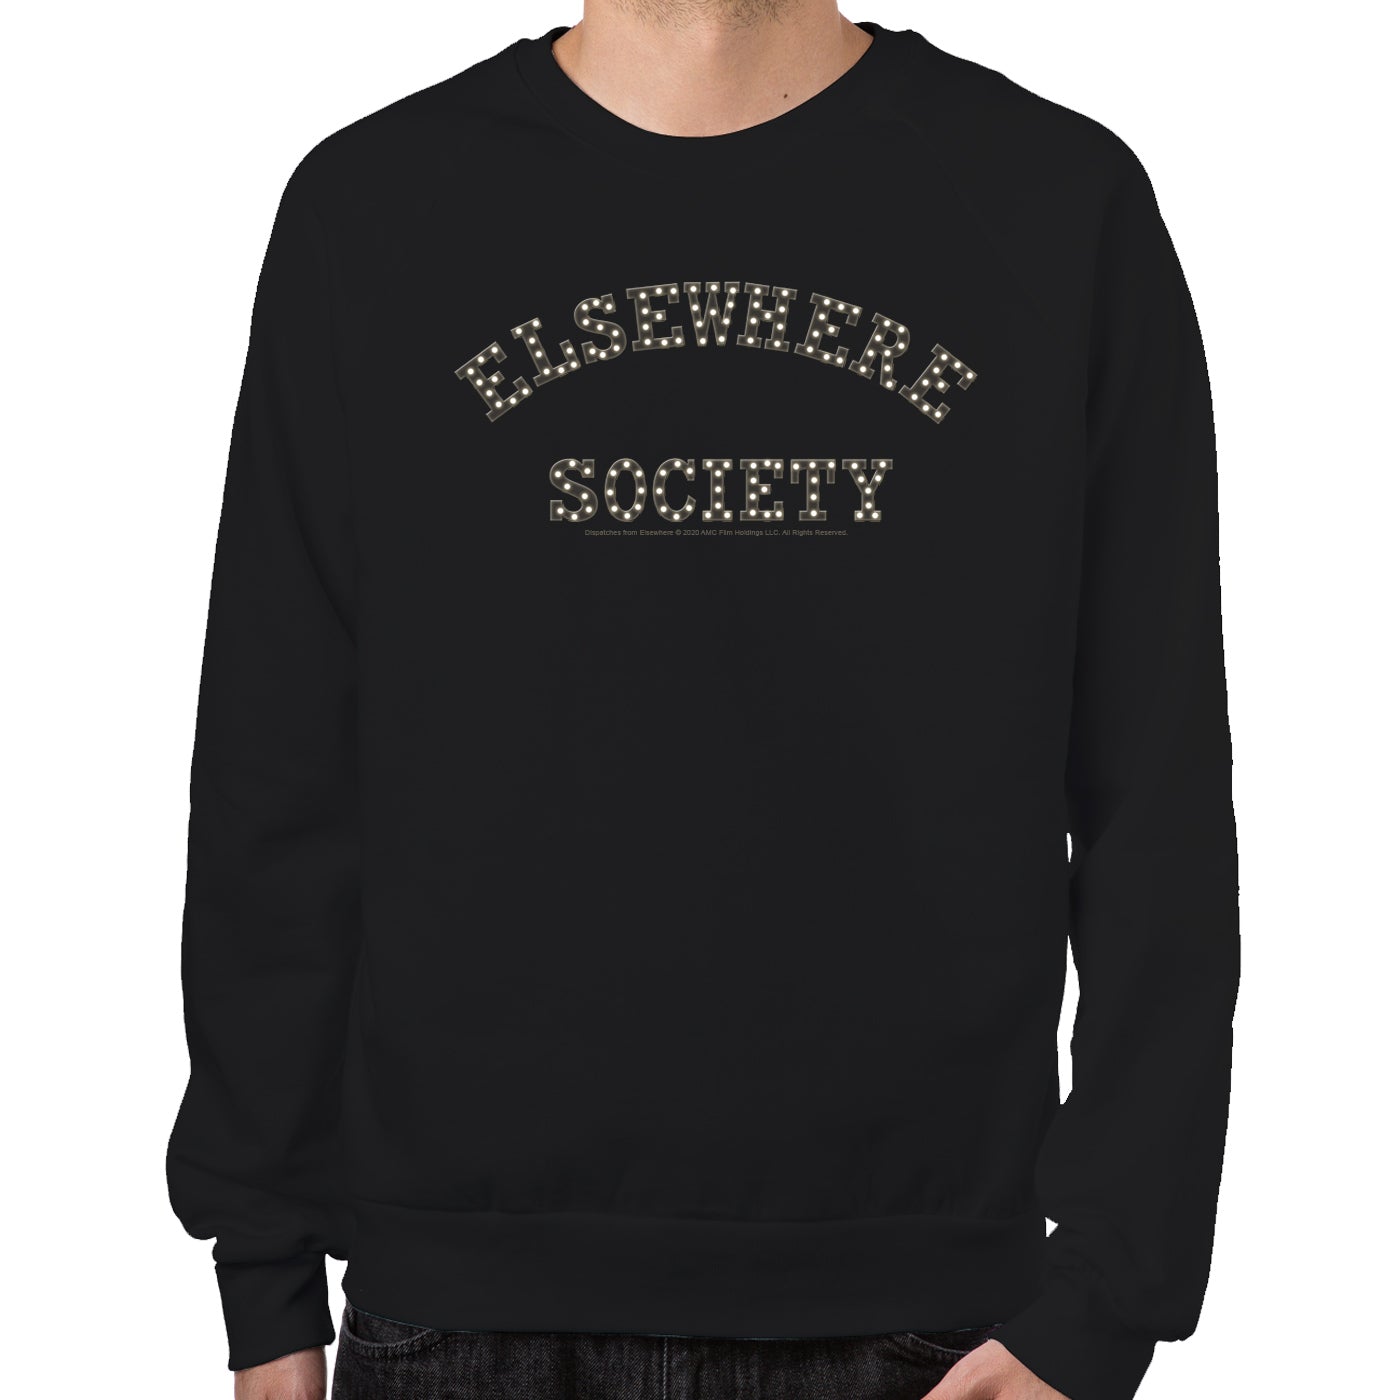 Dispatches From Elsewhere Elsewhere Society Sweatshirt